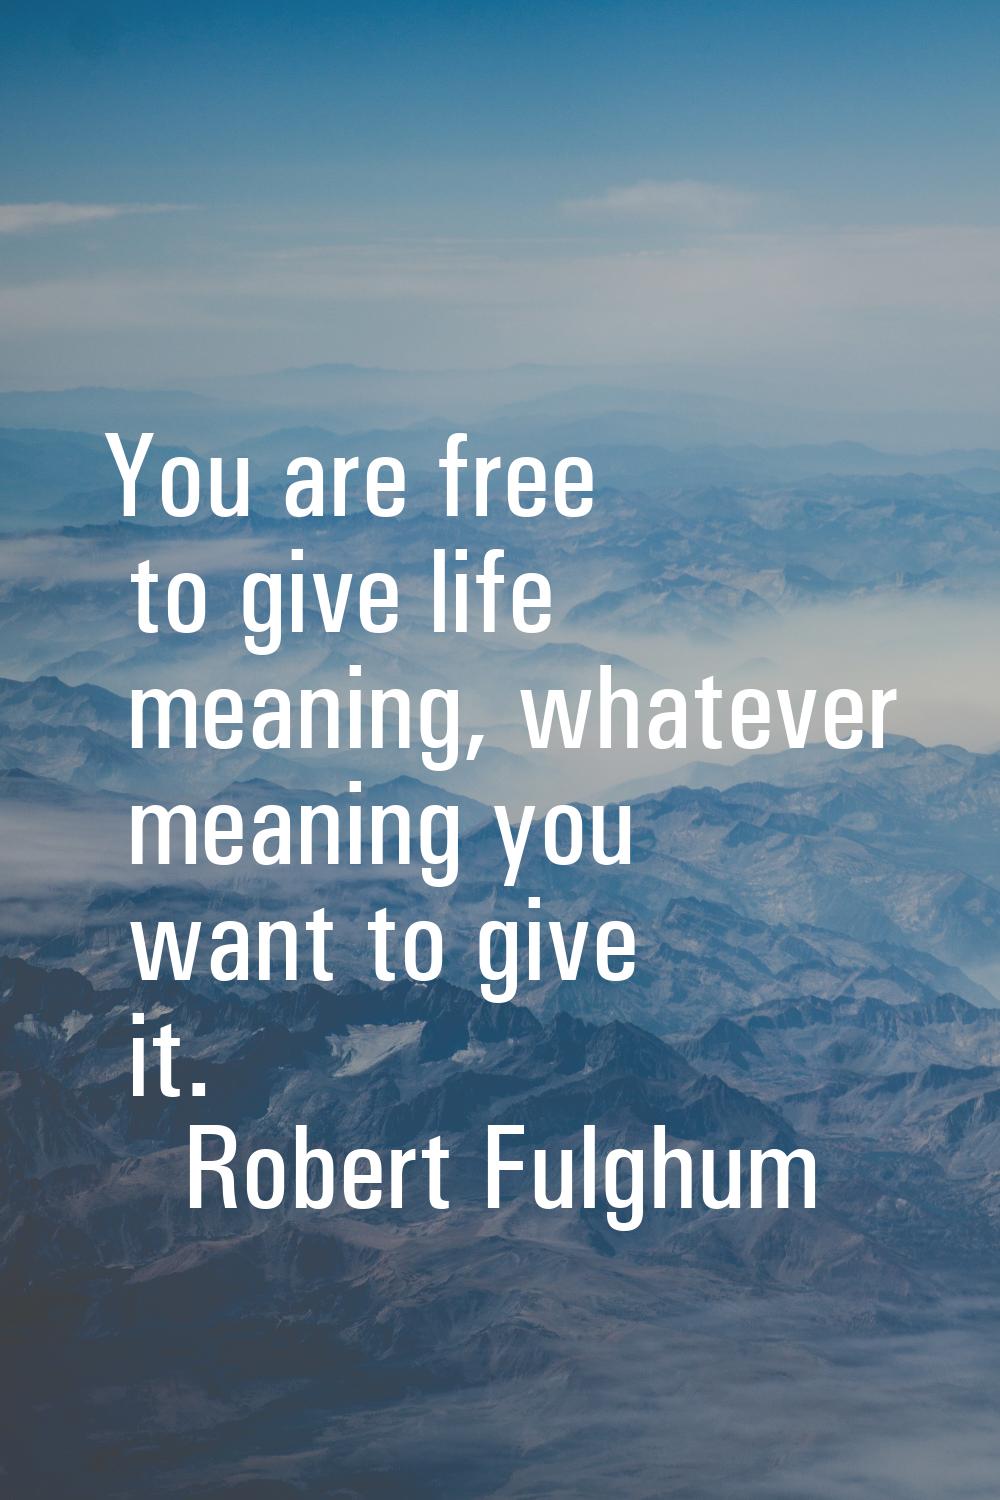 You are free to give life meaning, whatever meaning you want to give it.